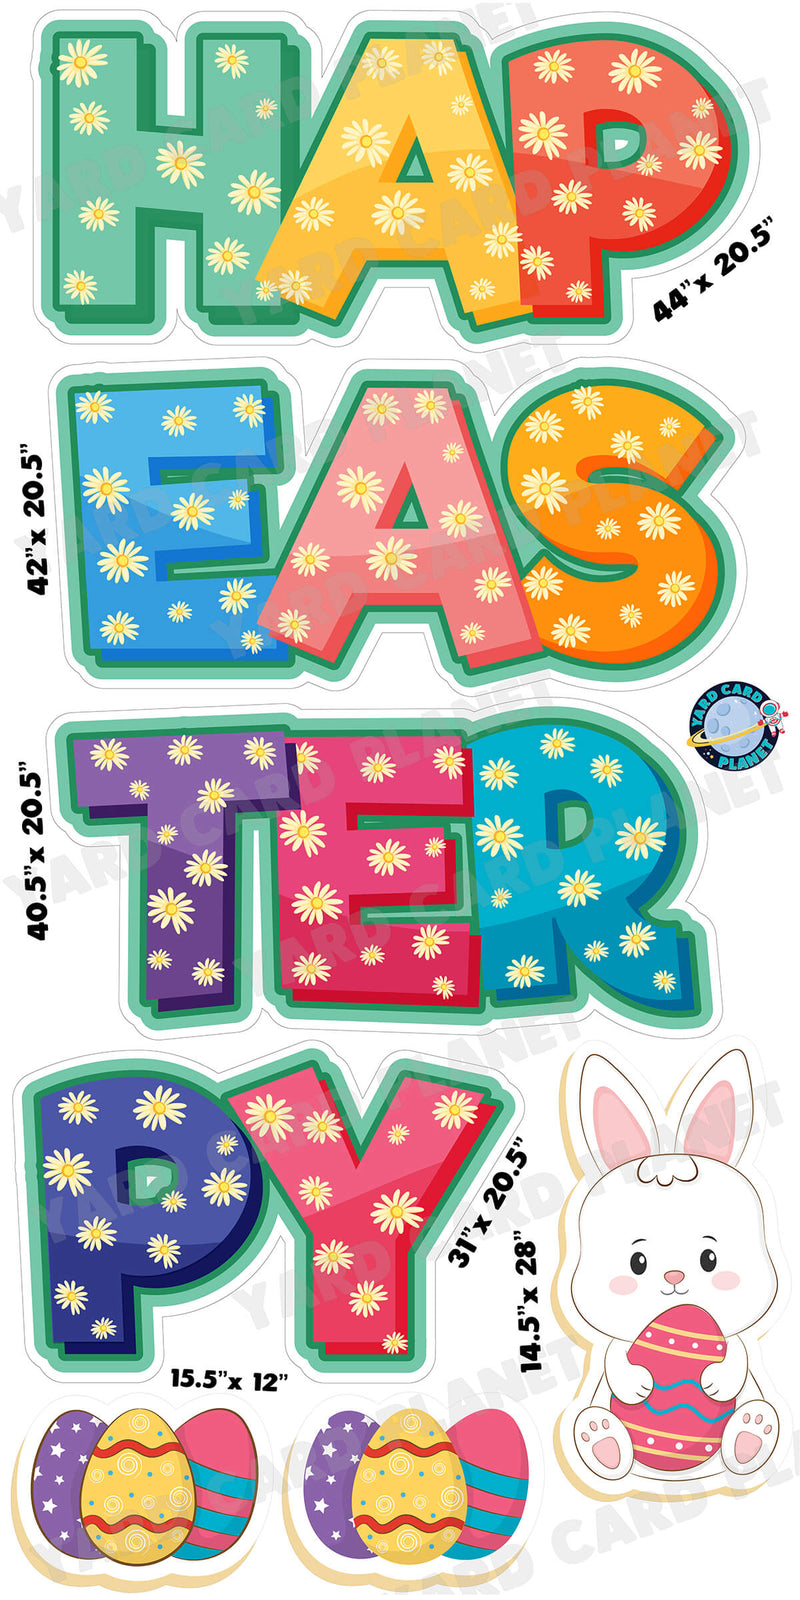 Happy Easter Floral EZ Quick Set and Yard Card Flair Set with Measurements